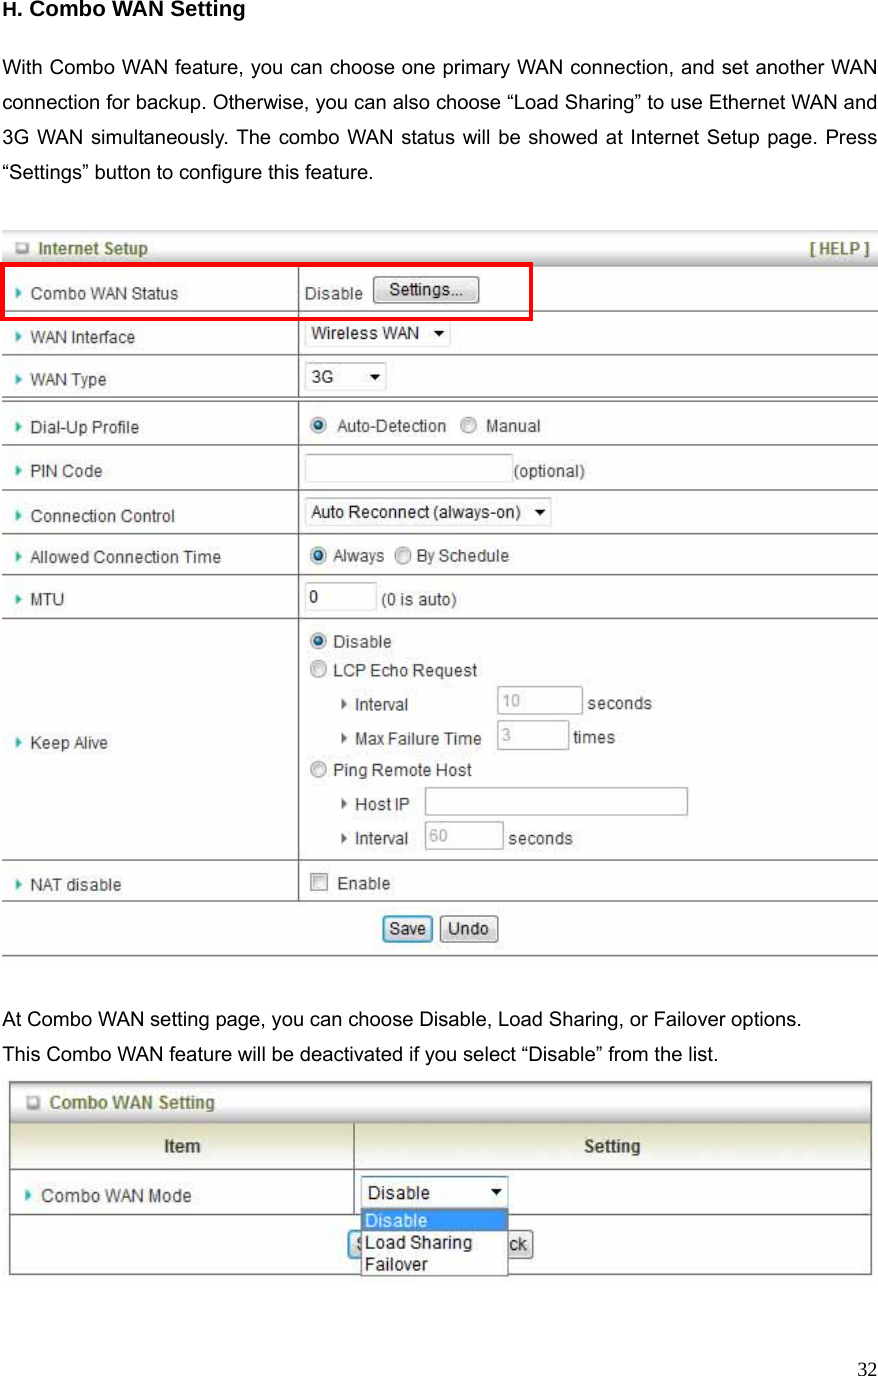  32H. Combo WAN Setting  With Combo WAN feature, you can choose one primary WAN connection, and set another WAN connection for backup. Otherwise, you can also choose “Load Sharing” to use Ethernet WAN and 3G WAN simultaneously. The combo WAN status will be showed at Internet Setup page. Press “Settings” button to configure this feature.    At Combo WAN setting page, you can choose Disable, Load Sharing, or Failover options. This Combo WAN feature will be deactivated if you select “Disable” from the list.   